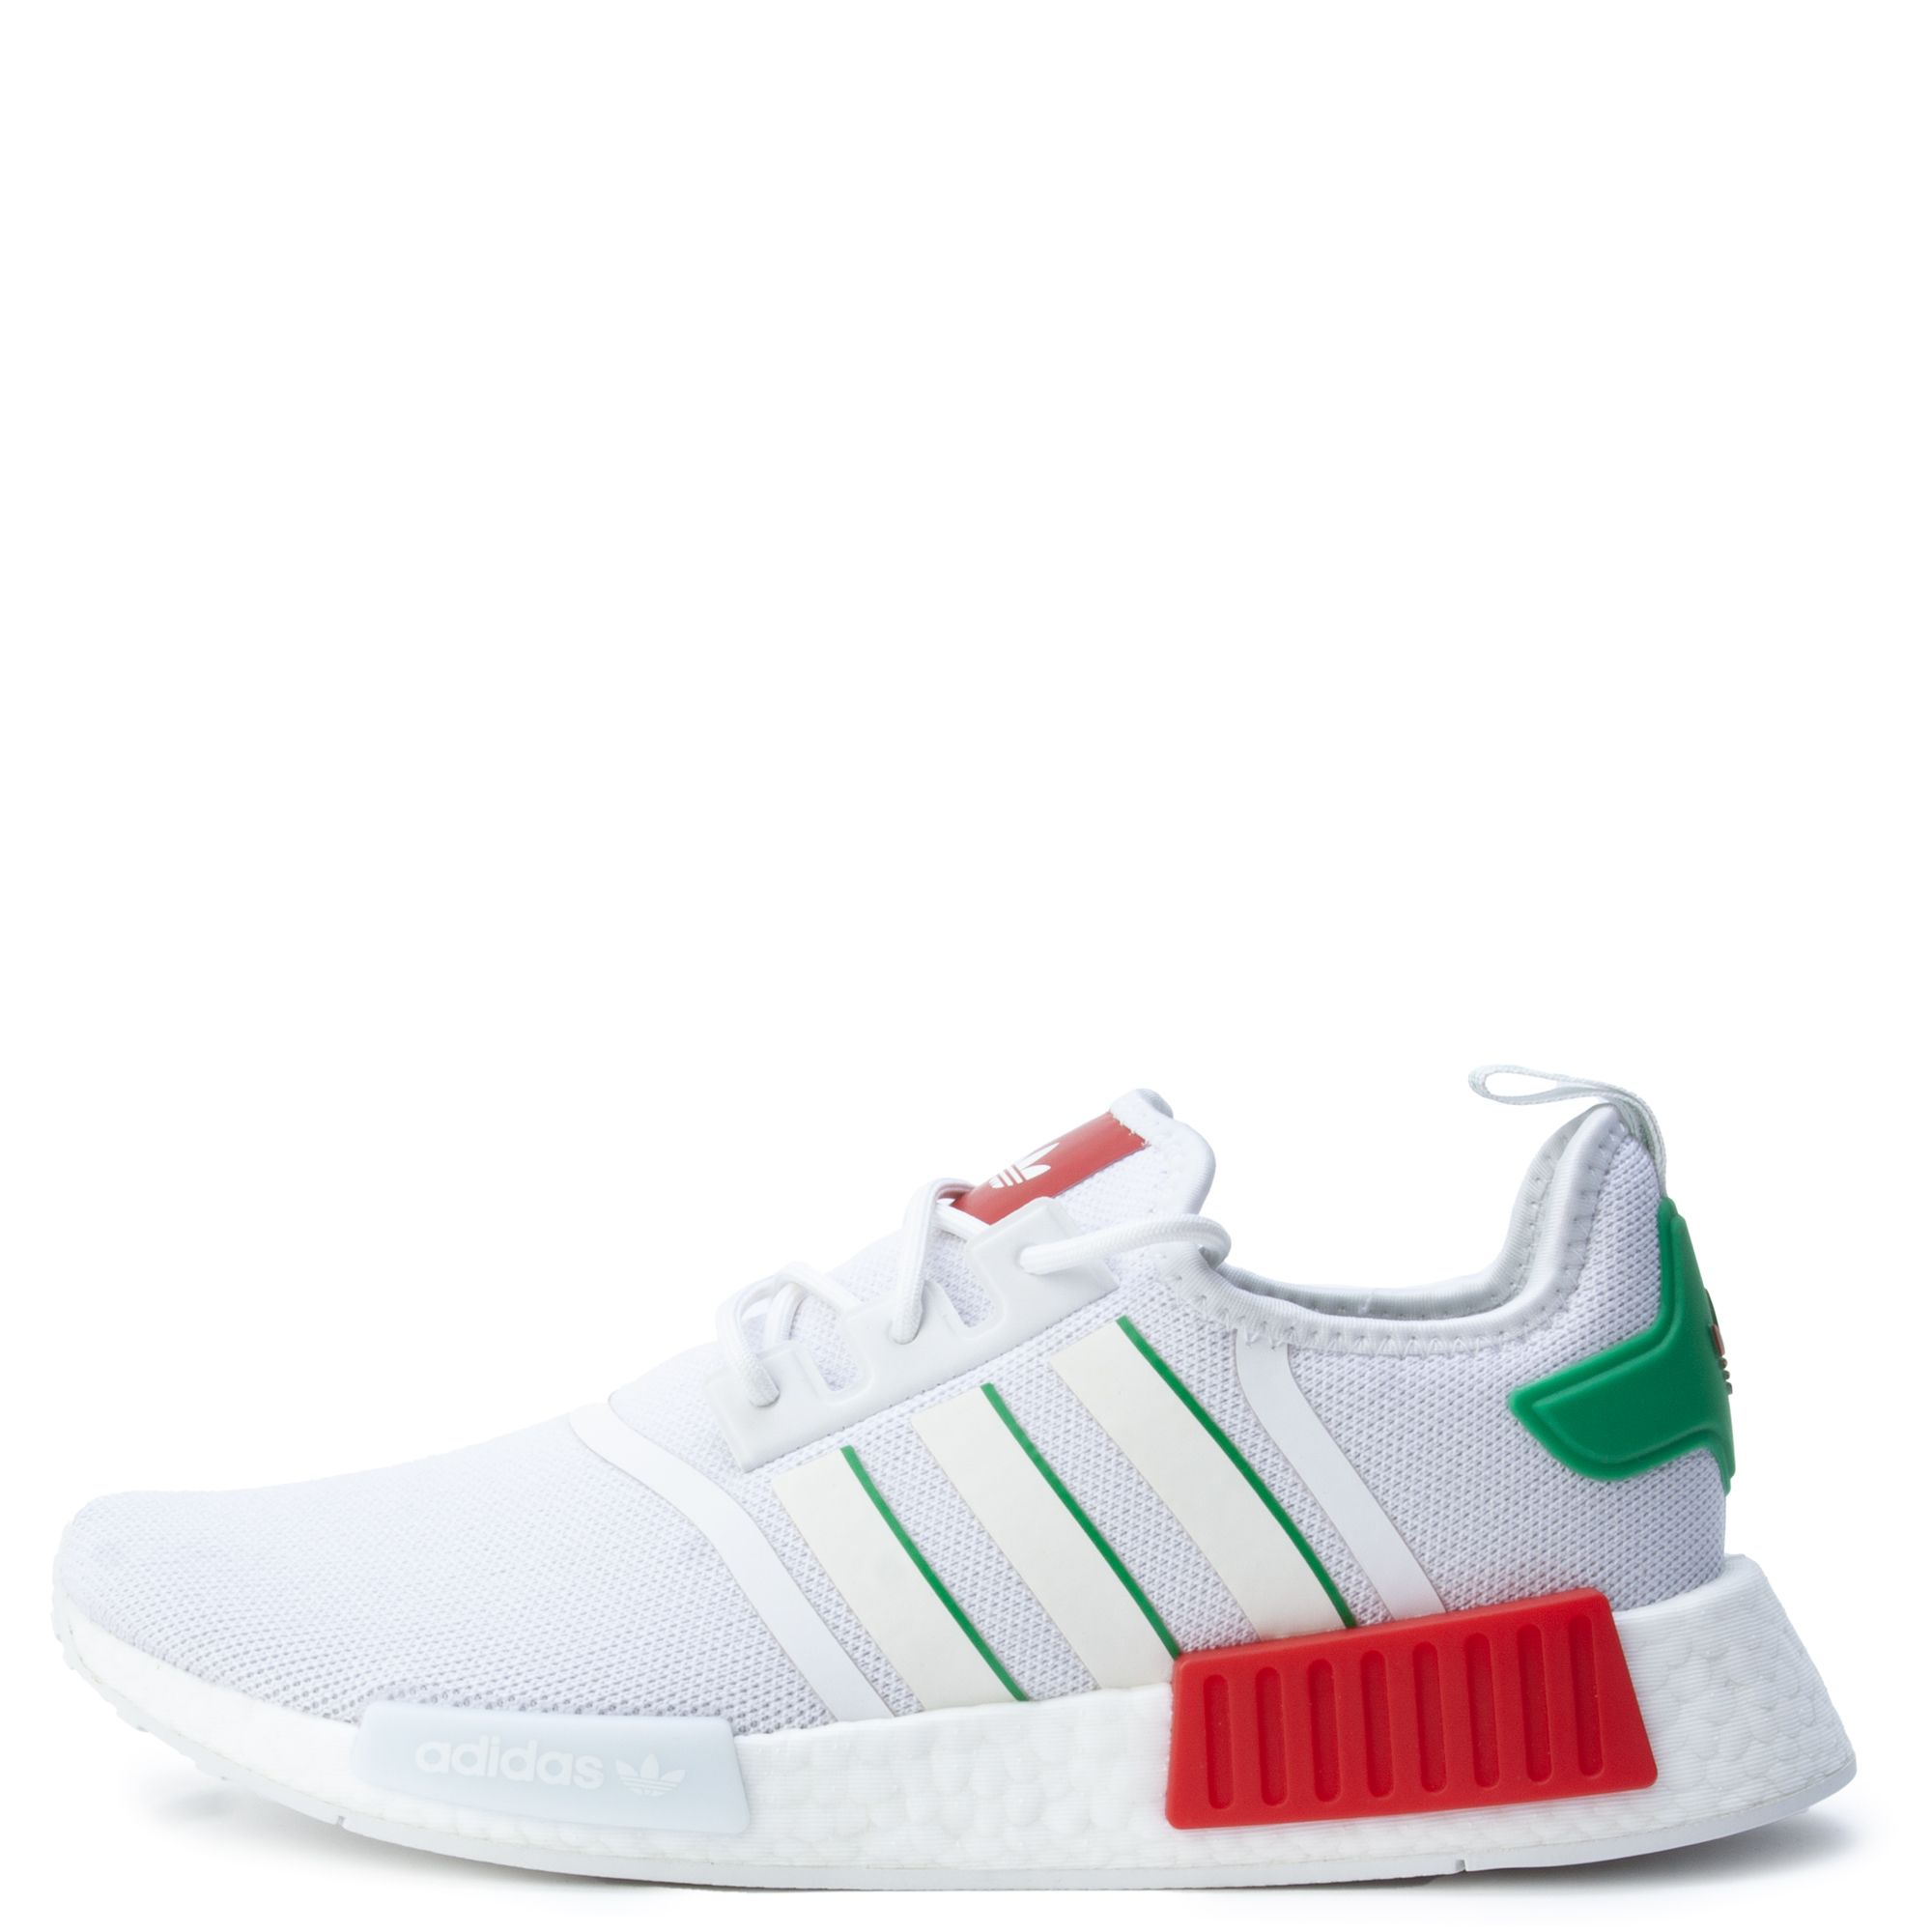 Adidas Originals Sneakers 'Nmd_R1' Male Size 9